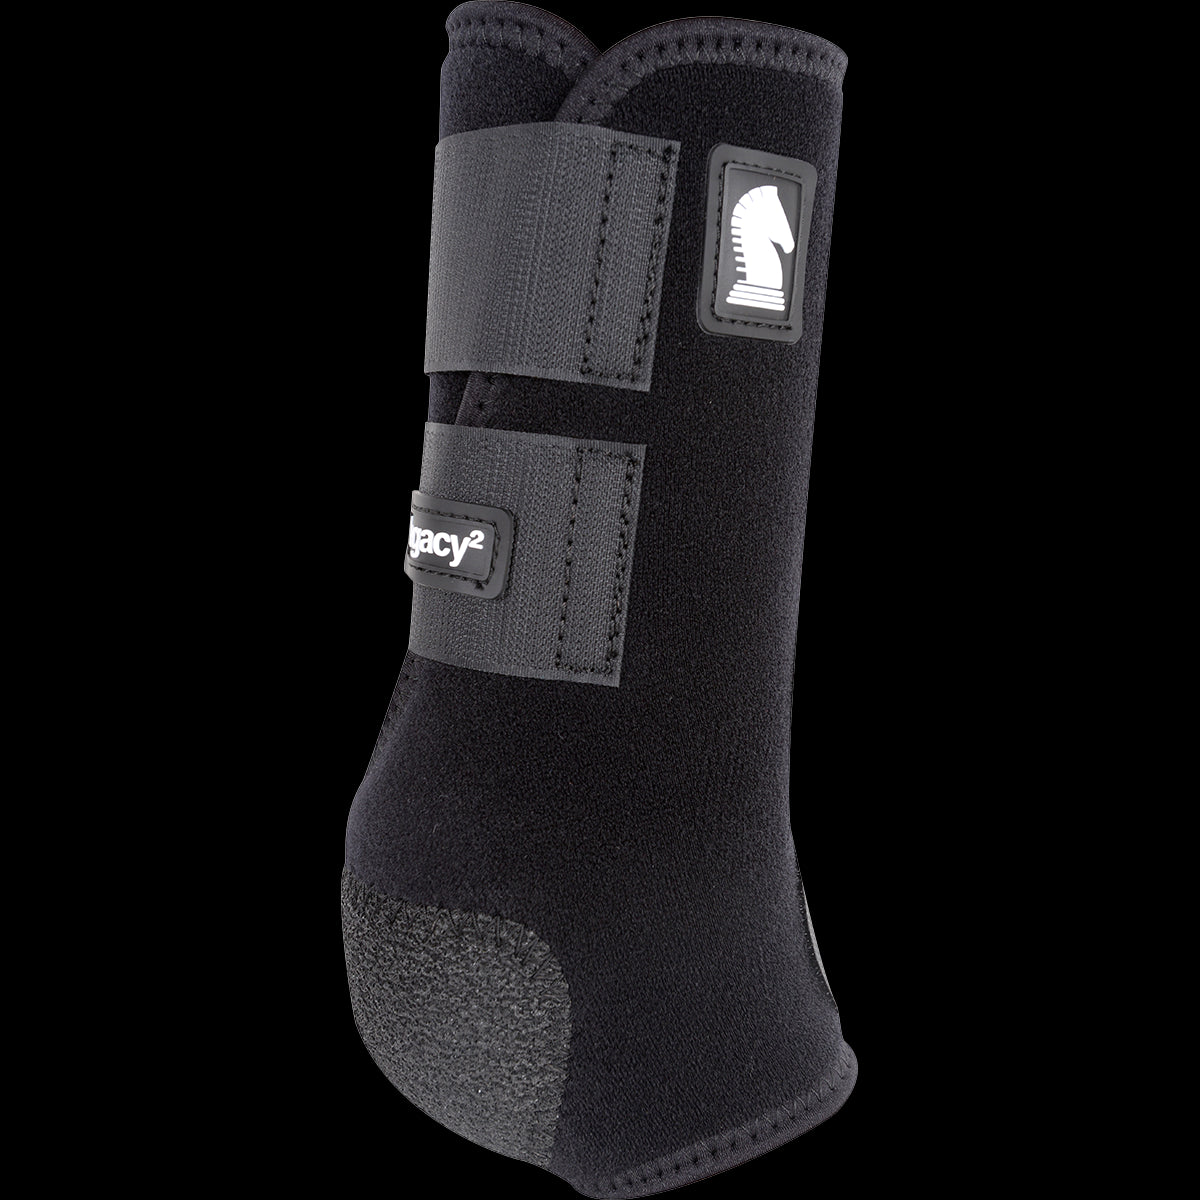 Classic Equine Legacy 2 Protective Boot 2pack Hind Black